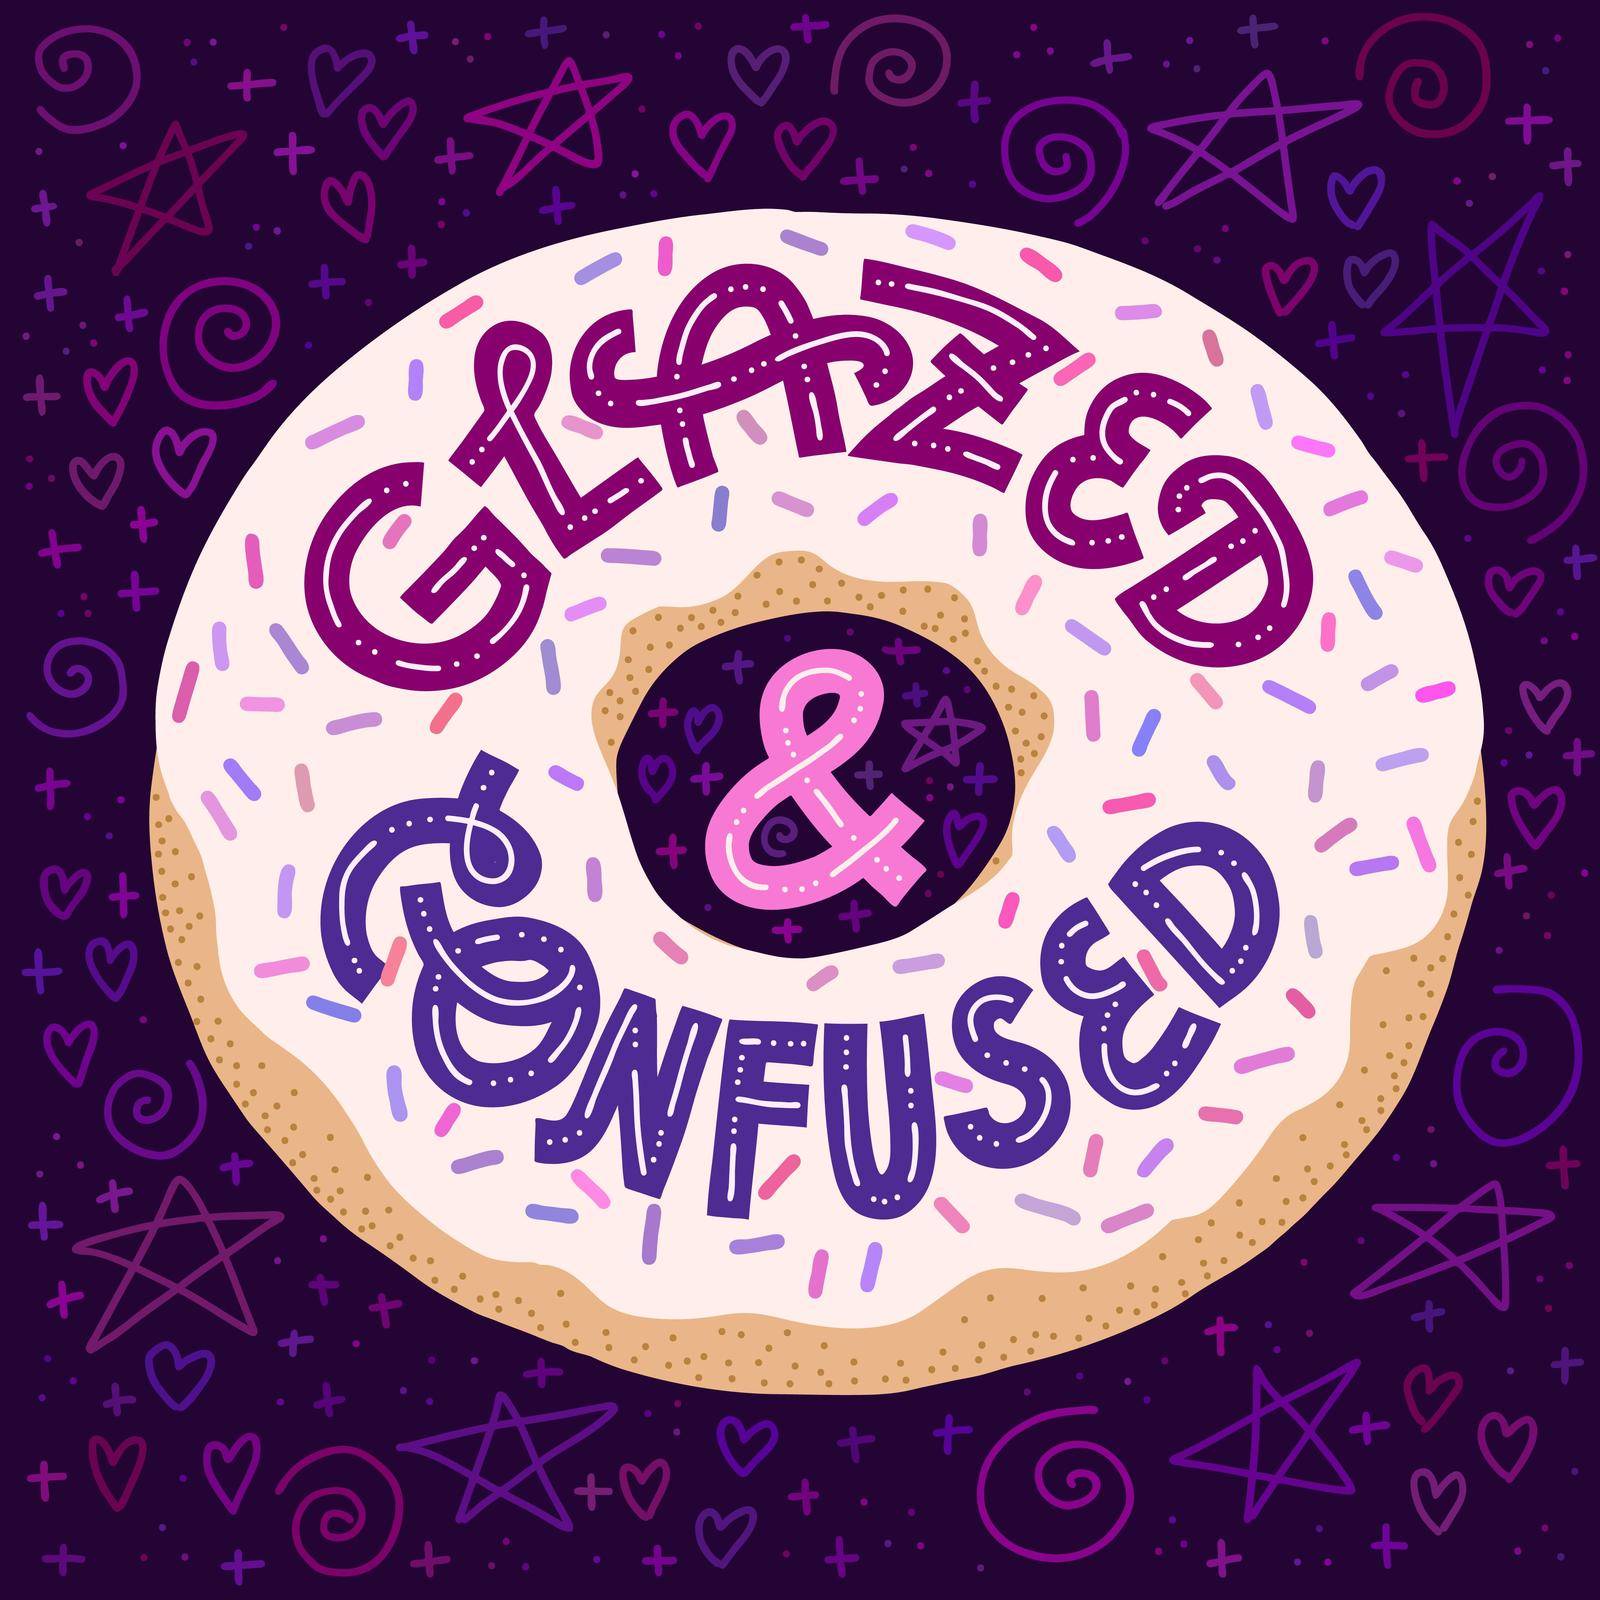 Glazed and Confuzed lettering on a donut with glaze and sprinkles. Dark background with doodles. Flat hand-drawn illustration. Funny card or poster print.